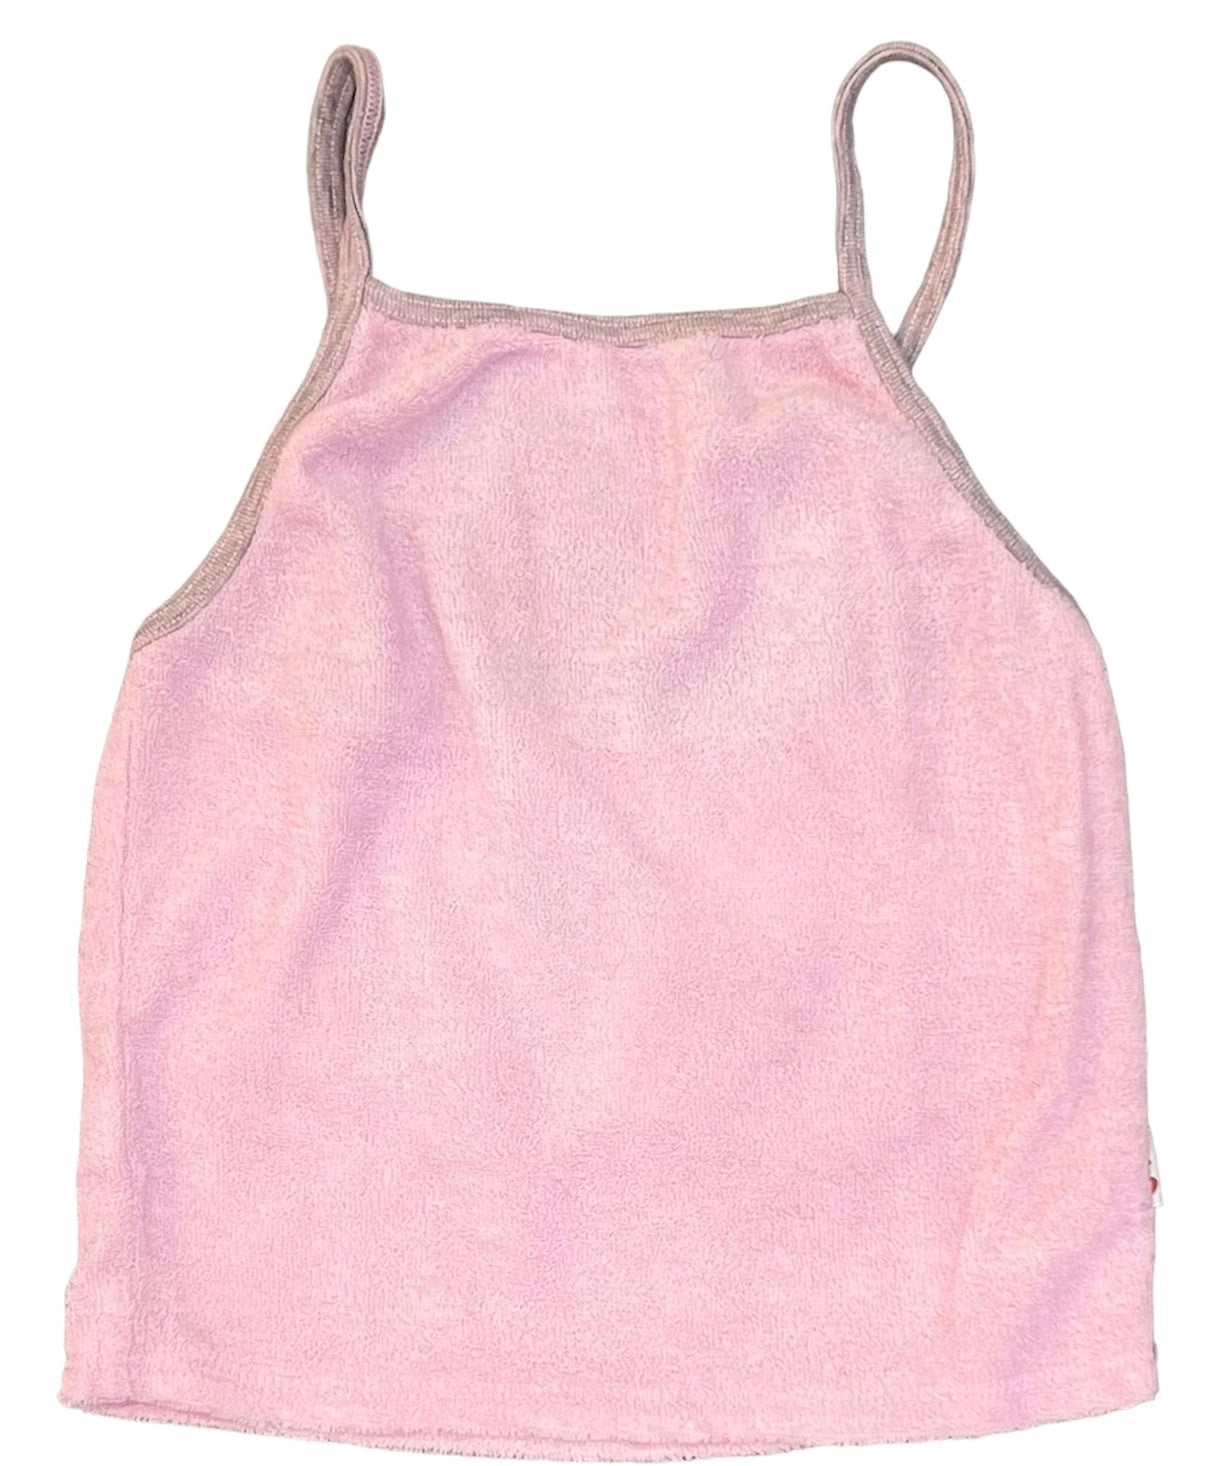 T2Love - Terry Cami Top with Contrast Trim - Pale Pink